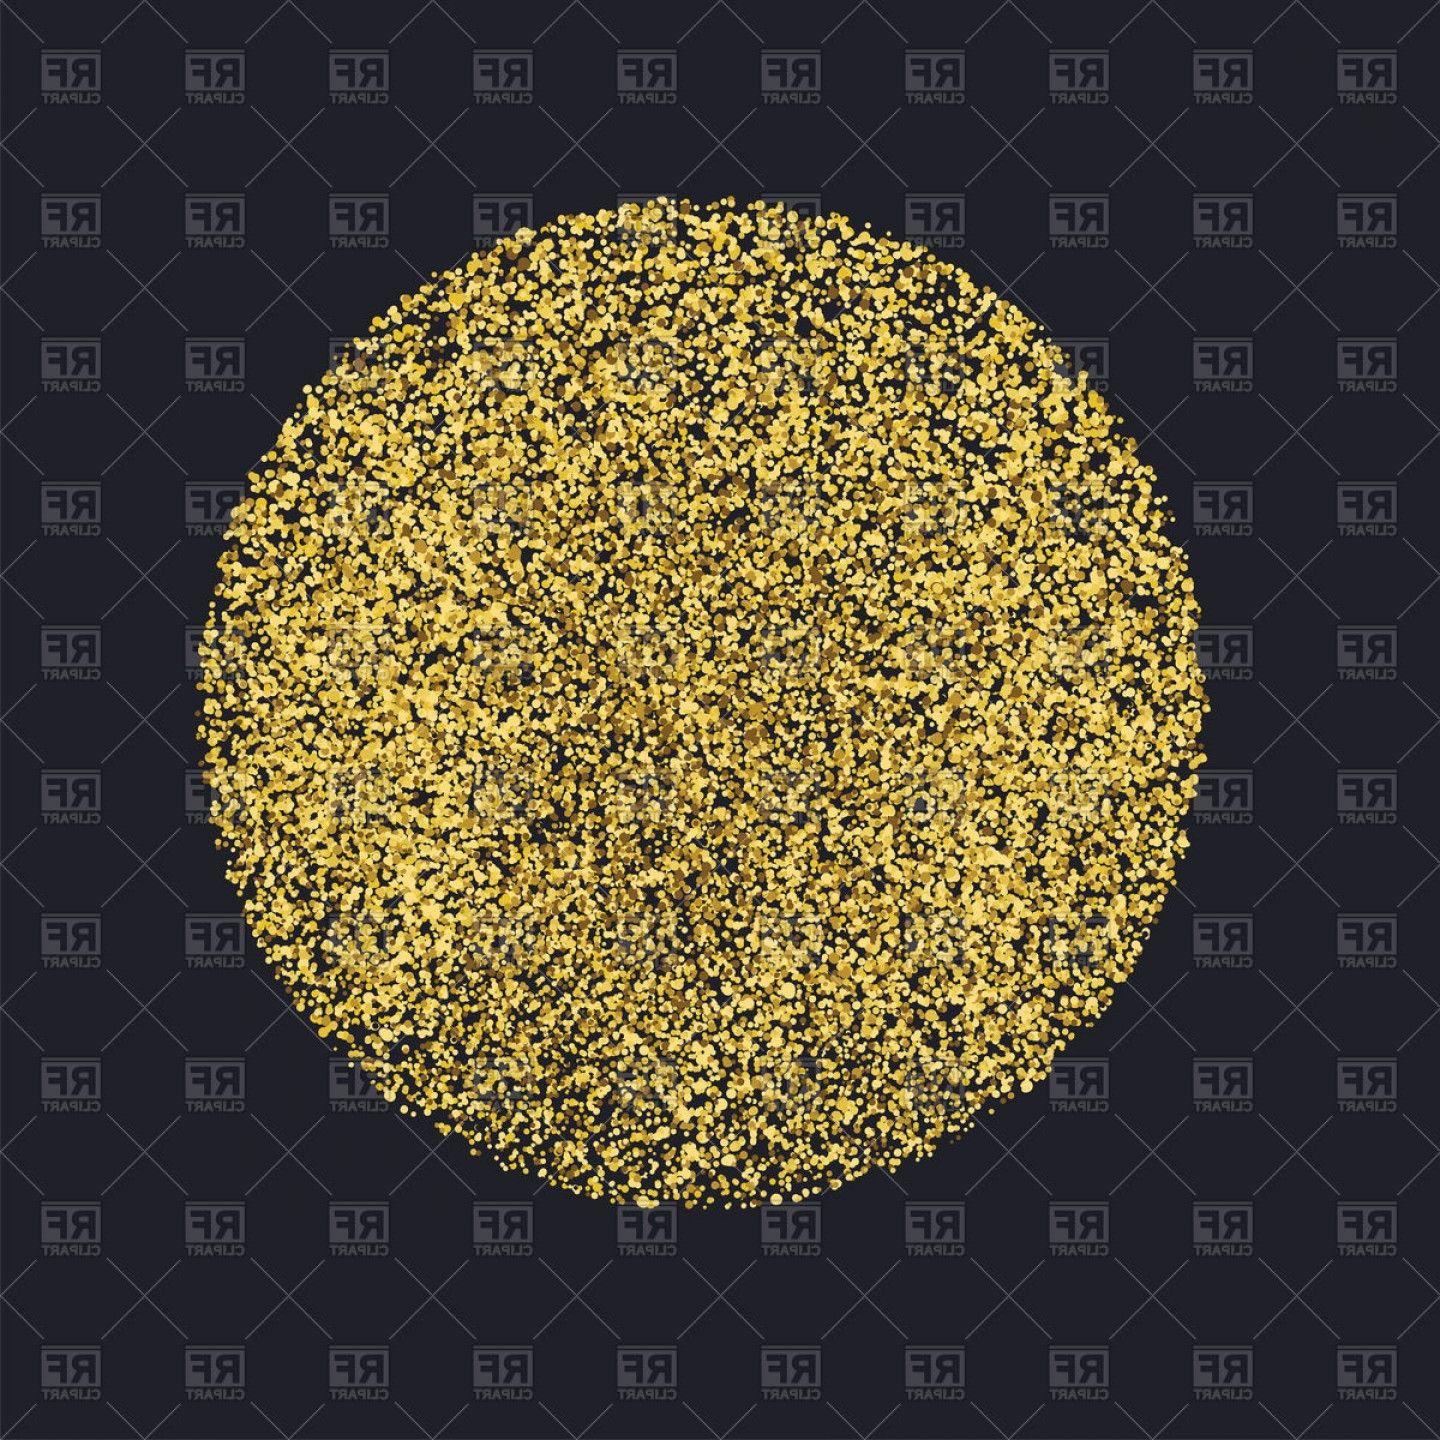 Circle With Gold Glitter Particles On Black Background Vector